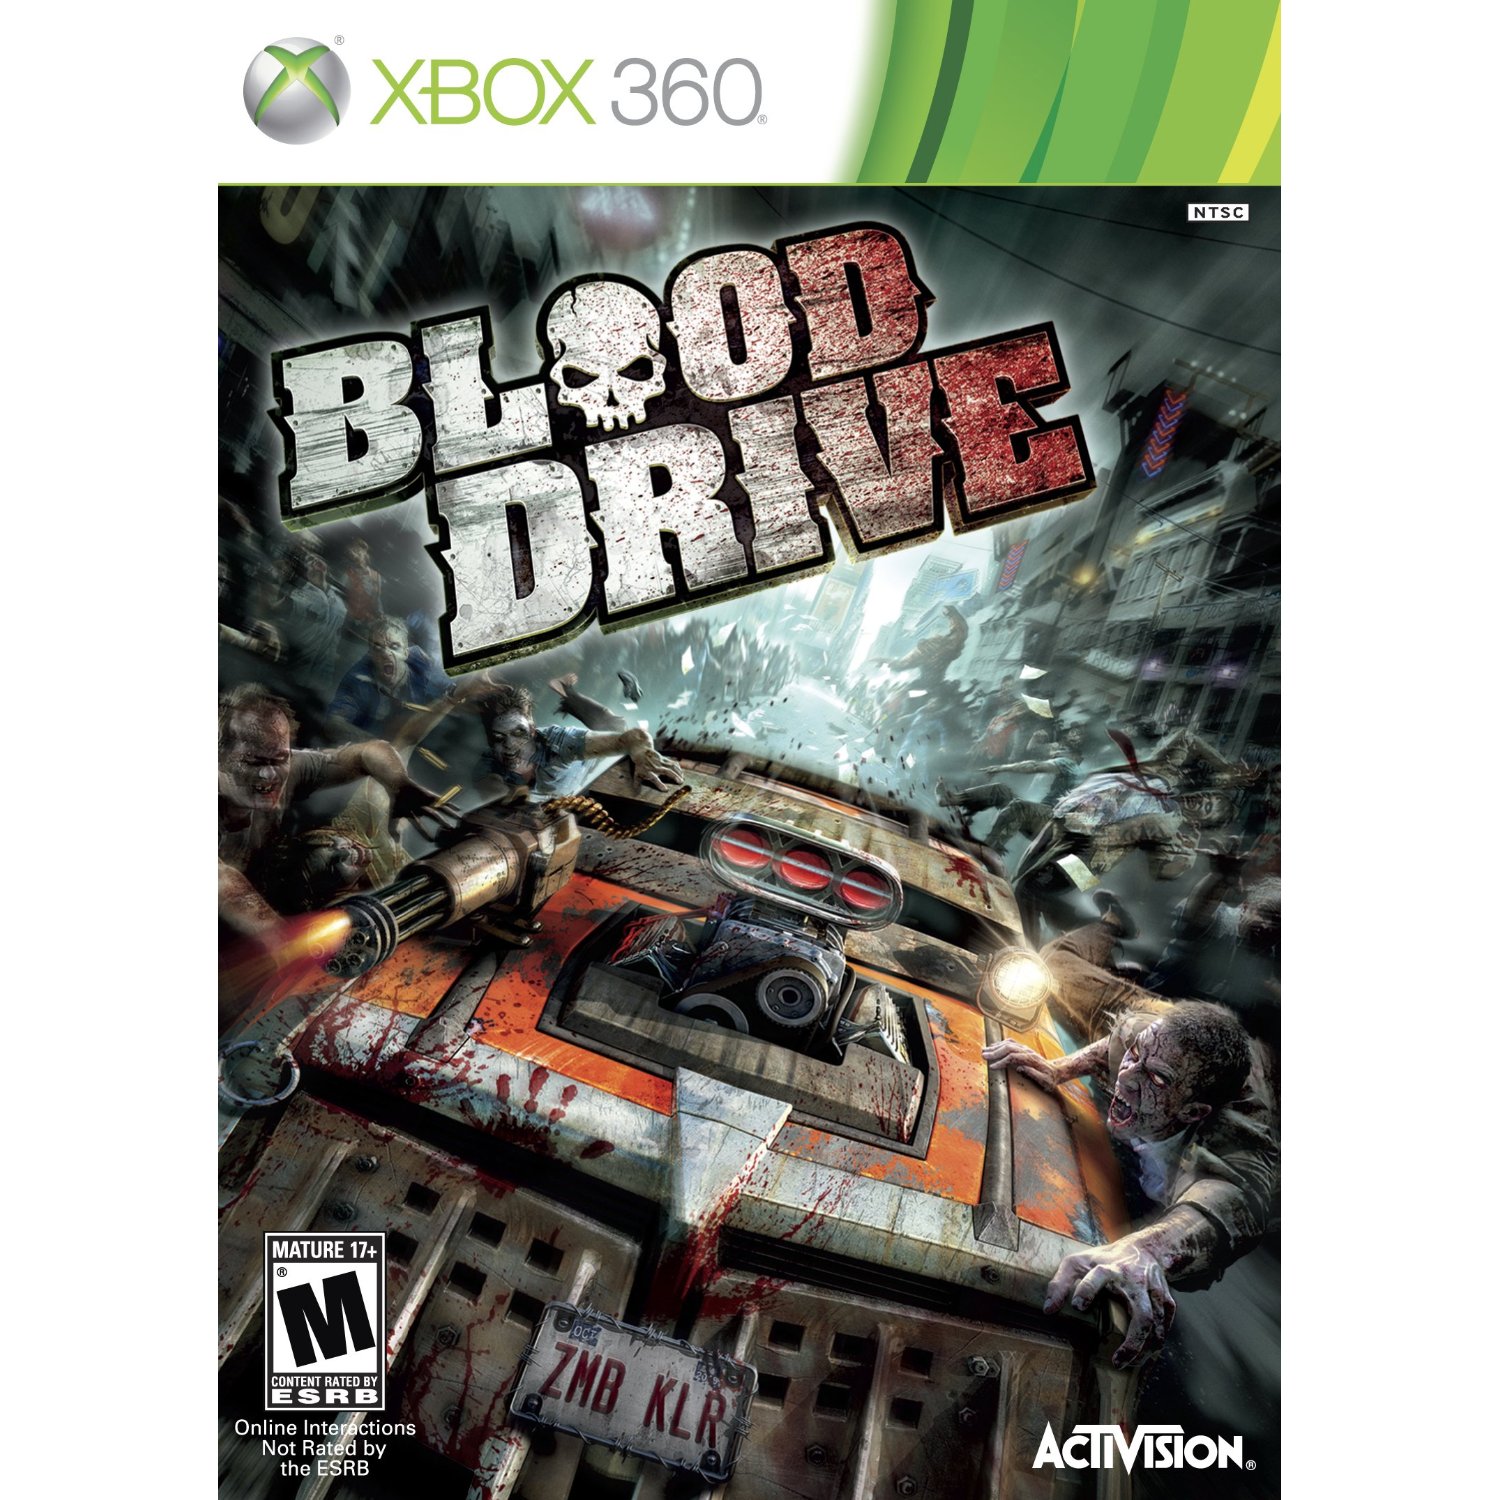 Xbox360 Action Games